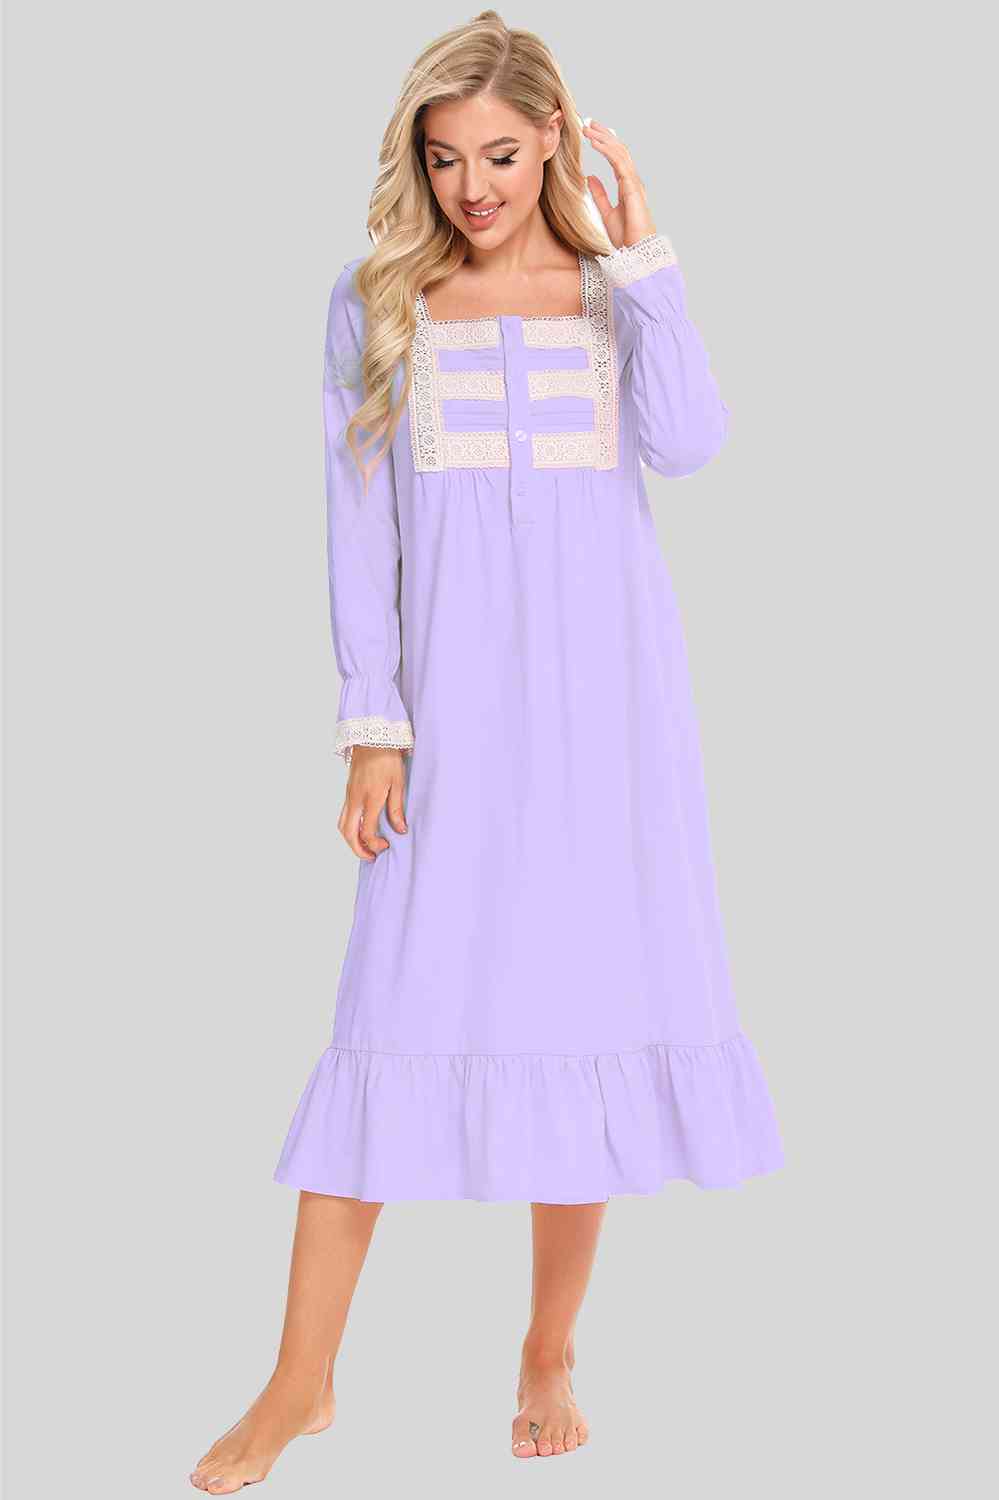 Model wearing traditional long sleeve lavender nightgown